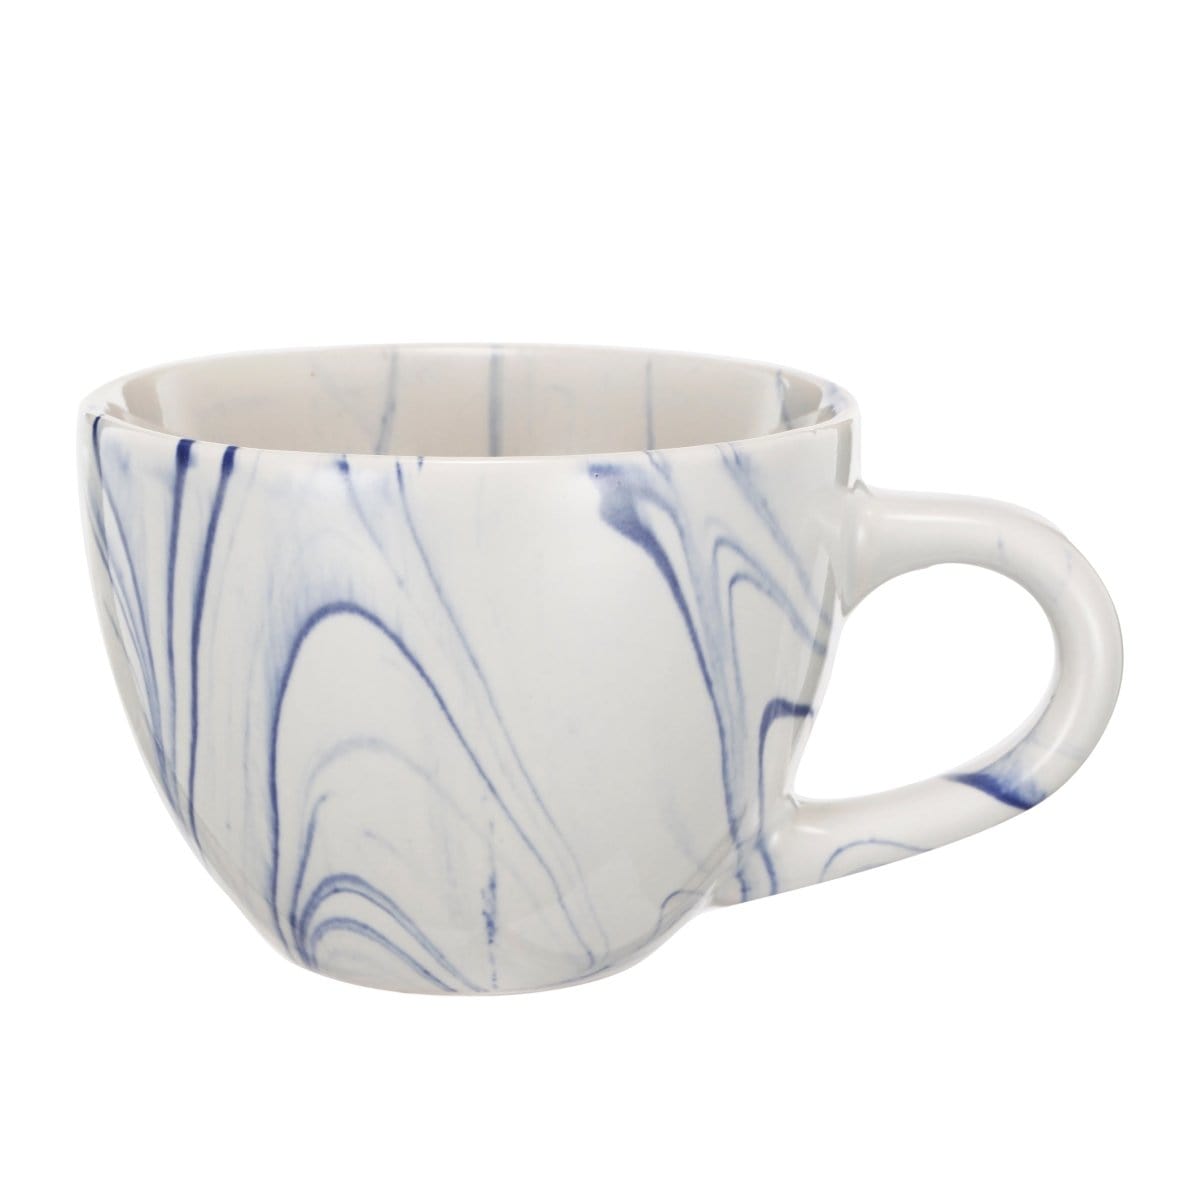 Accessories - AB-0259-Blue-Artist Fare  Cup & Saucer picket and rail